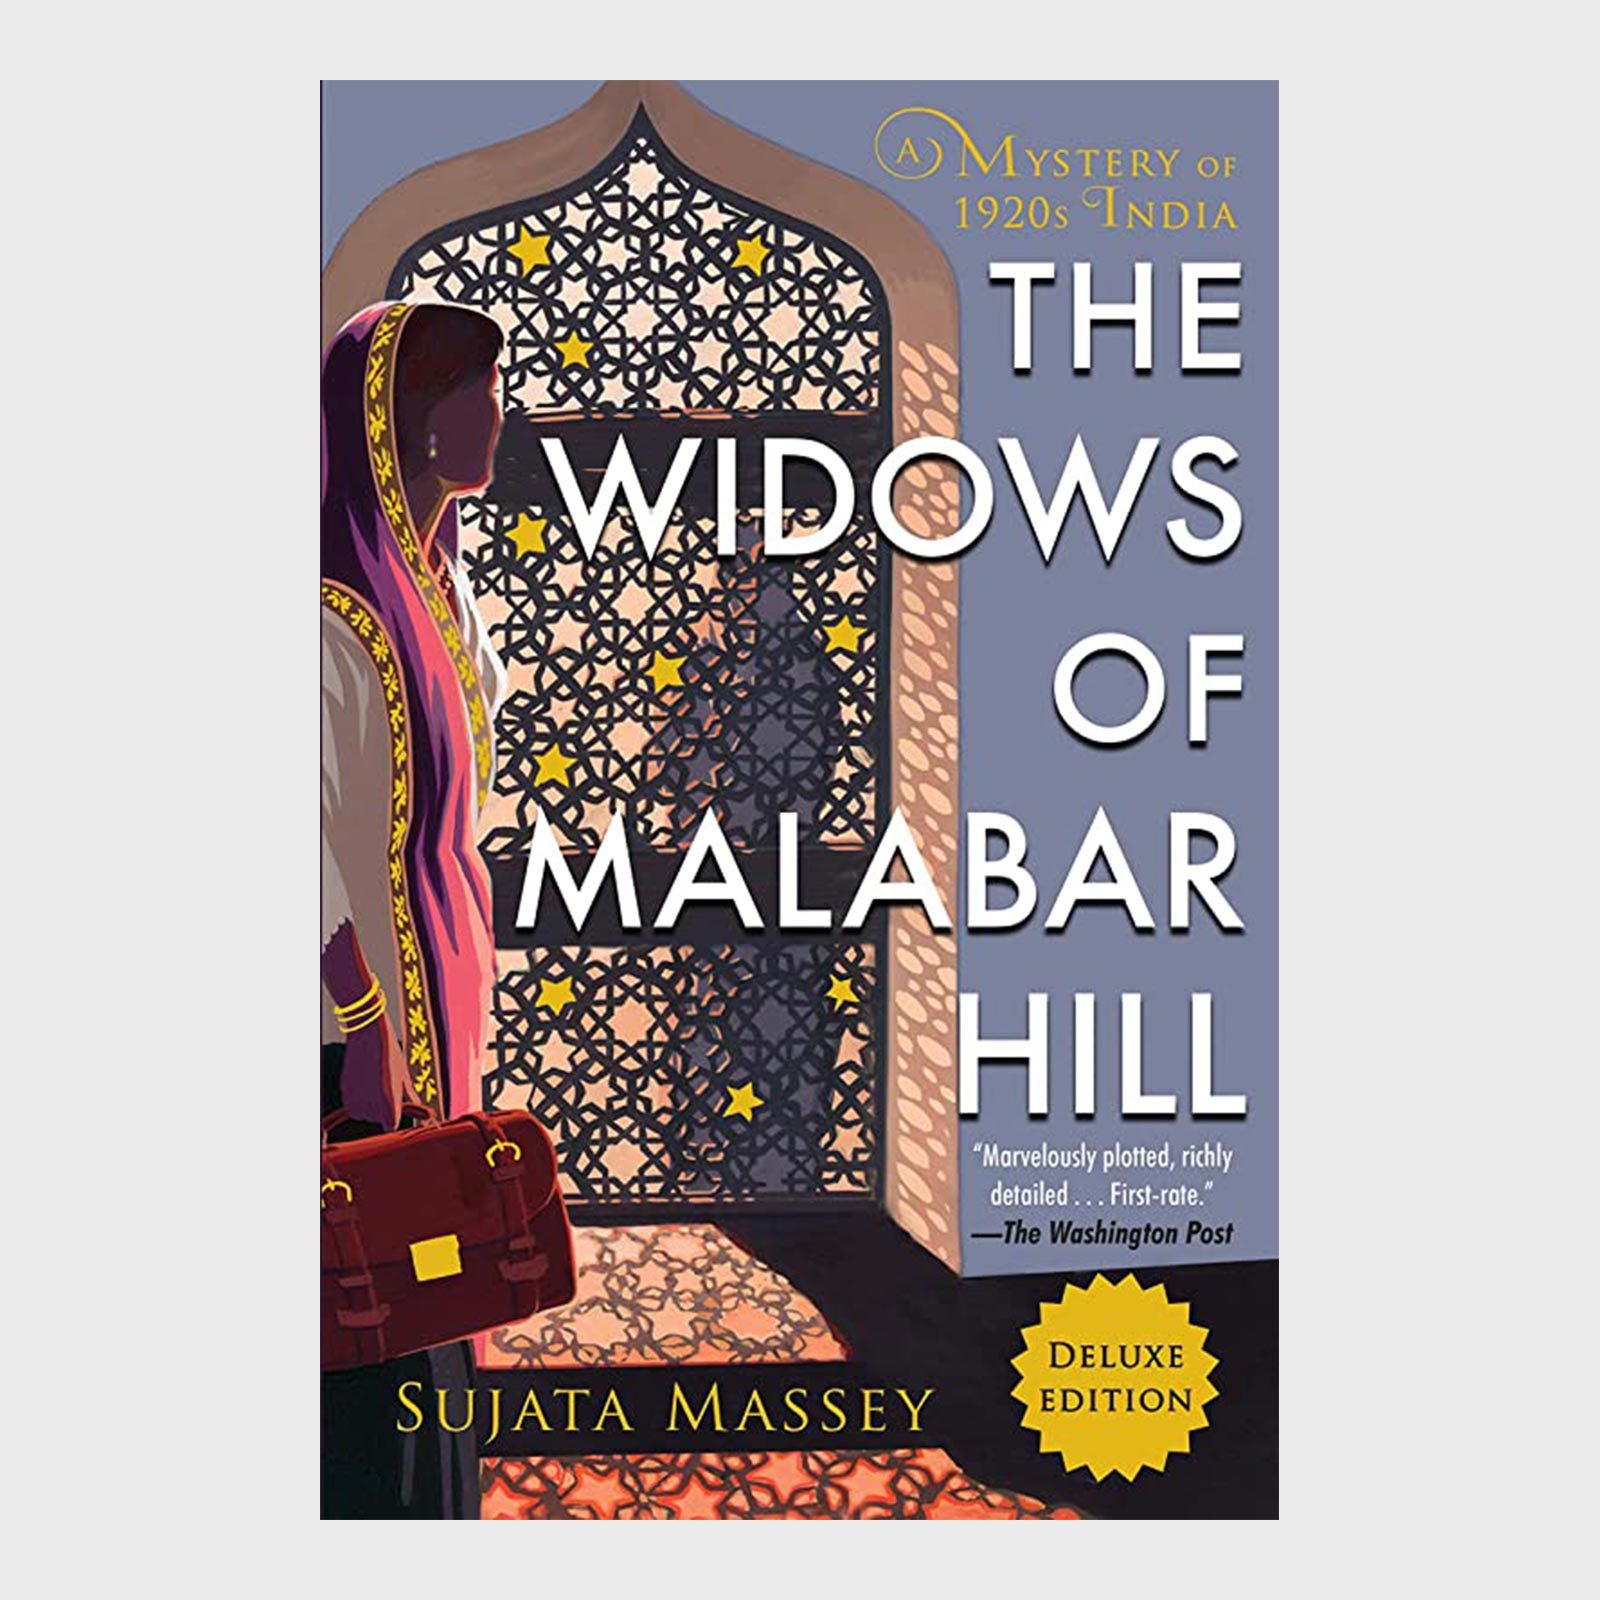 <h3><em>The Widows of Malabar Hill </em>by Sujata Massey</h3> <p><strong>Setting:</strong> Bombay, India</p> <p>Welcome to India! It doesn't take a memoir or travelogue to make an immersive travel book. Sujata Massey's imaginative <a href="https://www.rd.com/list/mystery-book-series/" rel="noopener noreferrer">mystery series</a> set in 1920s Bombay will make you feel like you've stepped back in time to witness India in the final chapters of the British Raj. In the first installment, <a href="https://www.amazon.com/Widows-Malabar-Mystery-1920s-India-ebook/dp/B07226BHDG" rel="noopener noreferrer"><em>The Widows of Malabar Hill</em></a> (2018), female lawyer extraordinaire Perveen Mistry fights back against crimes against women. Massey's perspective gives readers behind-the-scenes glimpses of daily life for women in both Muslim and Hindu households.</p> <p class="listicle-page__cta-button-shop"><a class="shop-btn" href="https://www.amazon.com/Widows-Malabar-Mystery-1920s-India-ebook/dp/B07226BHDG">Shop Now</a></p>